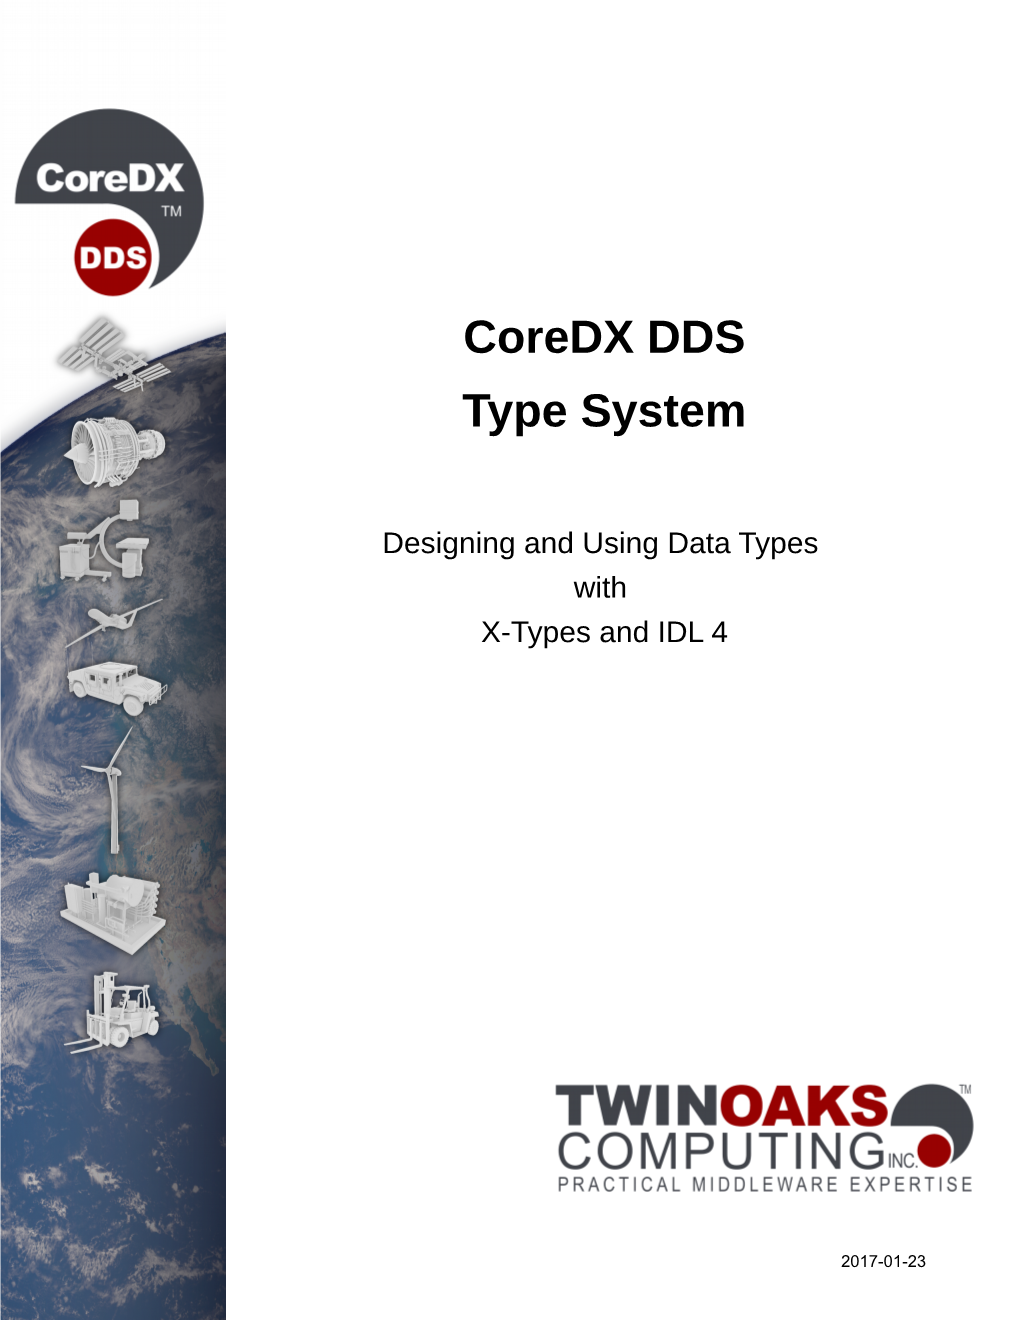 Coredx DDS Type System